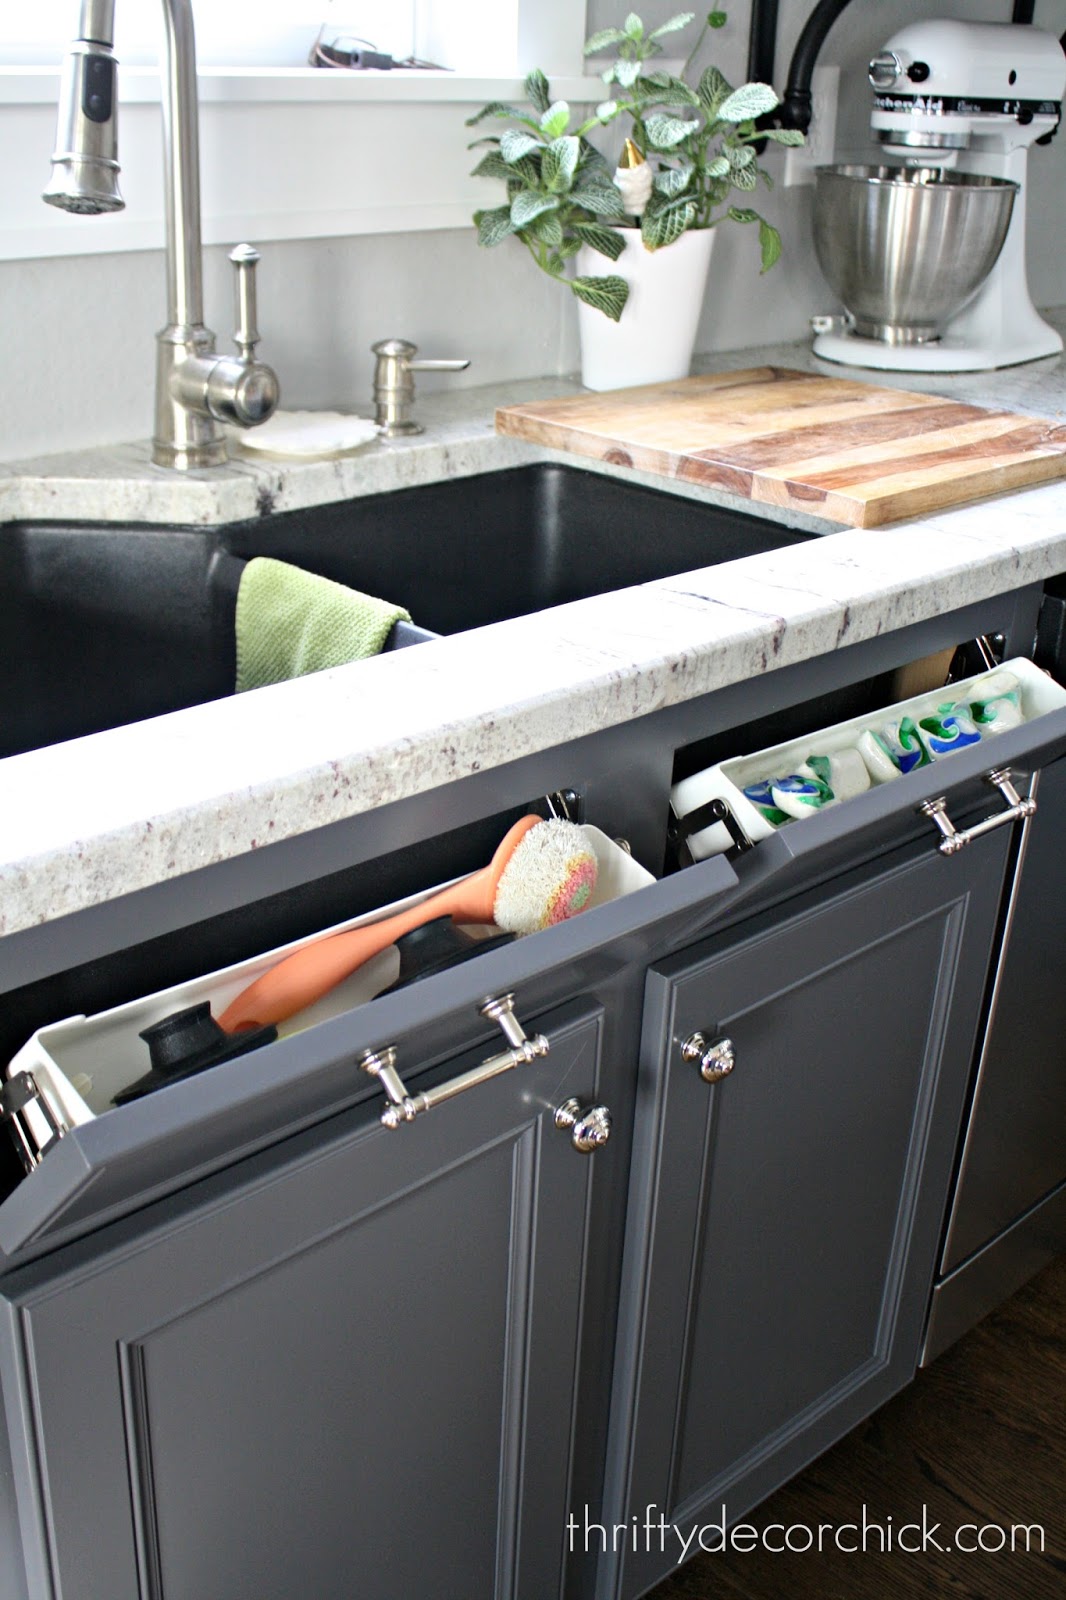 Making the Most of Storage Space Under the Sink, Thrifty Decor Chick